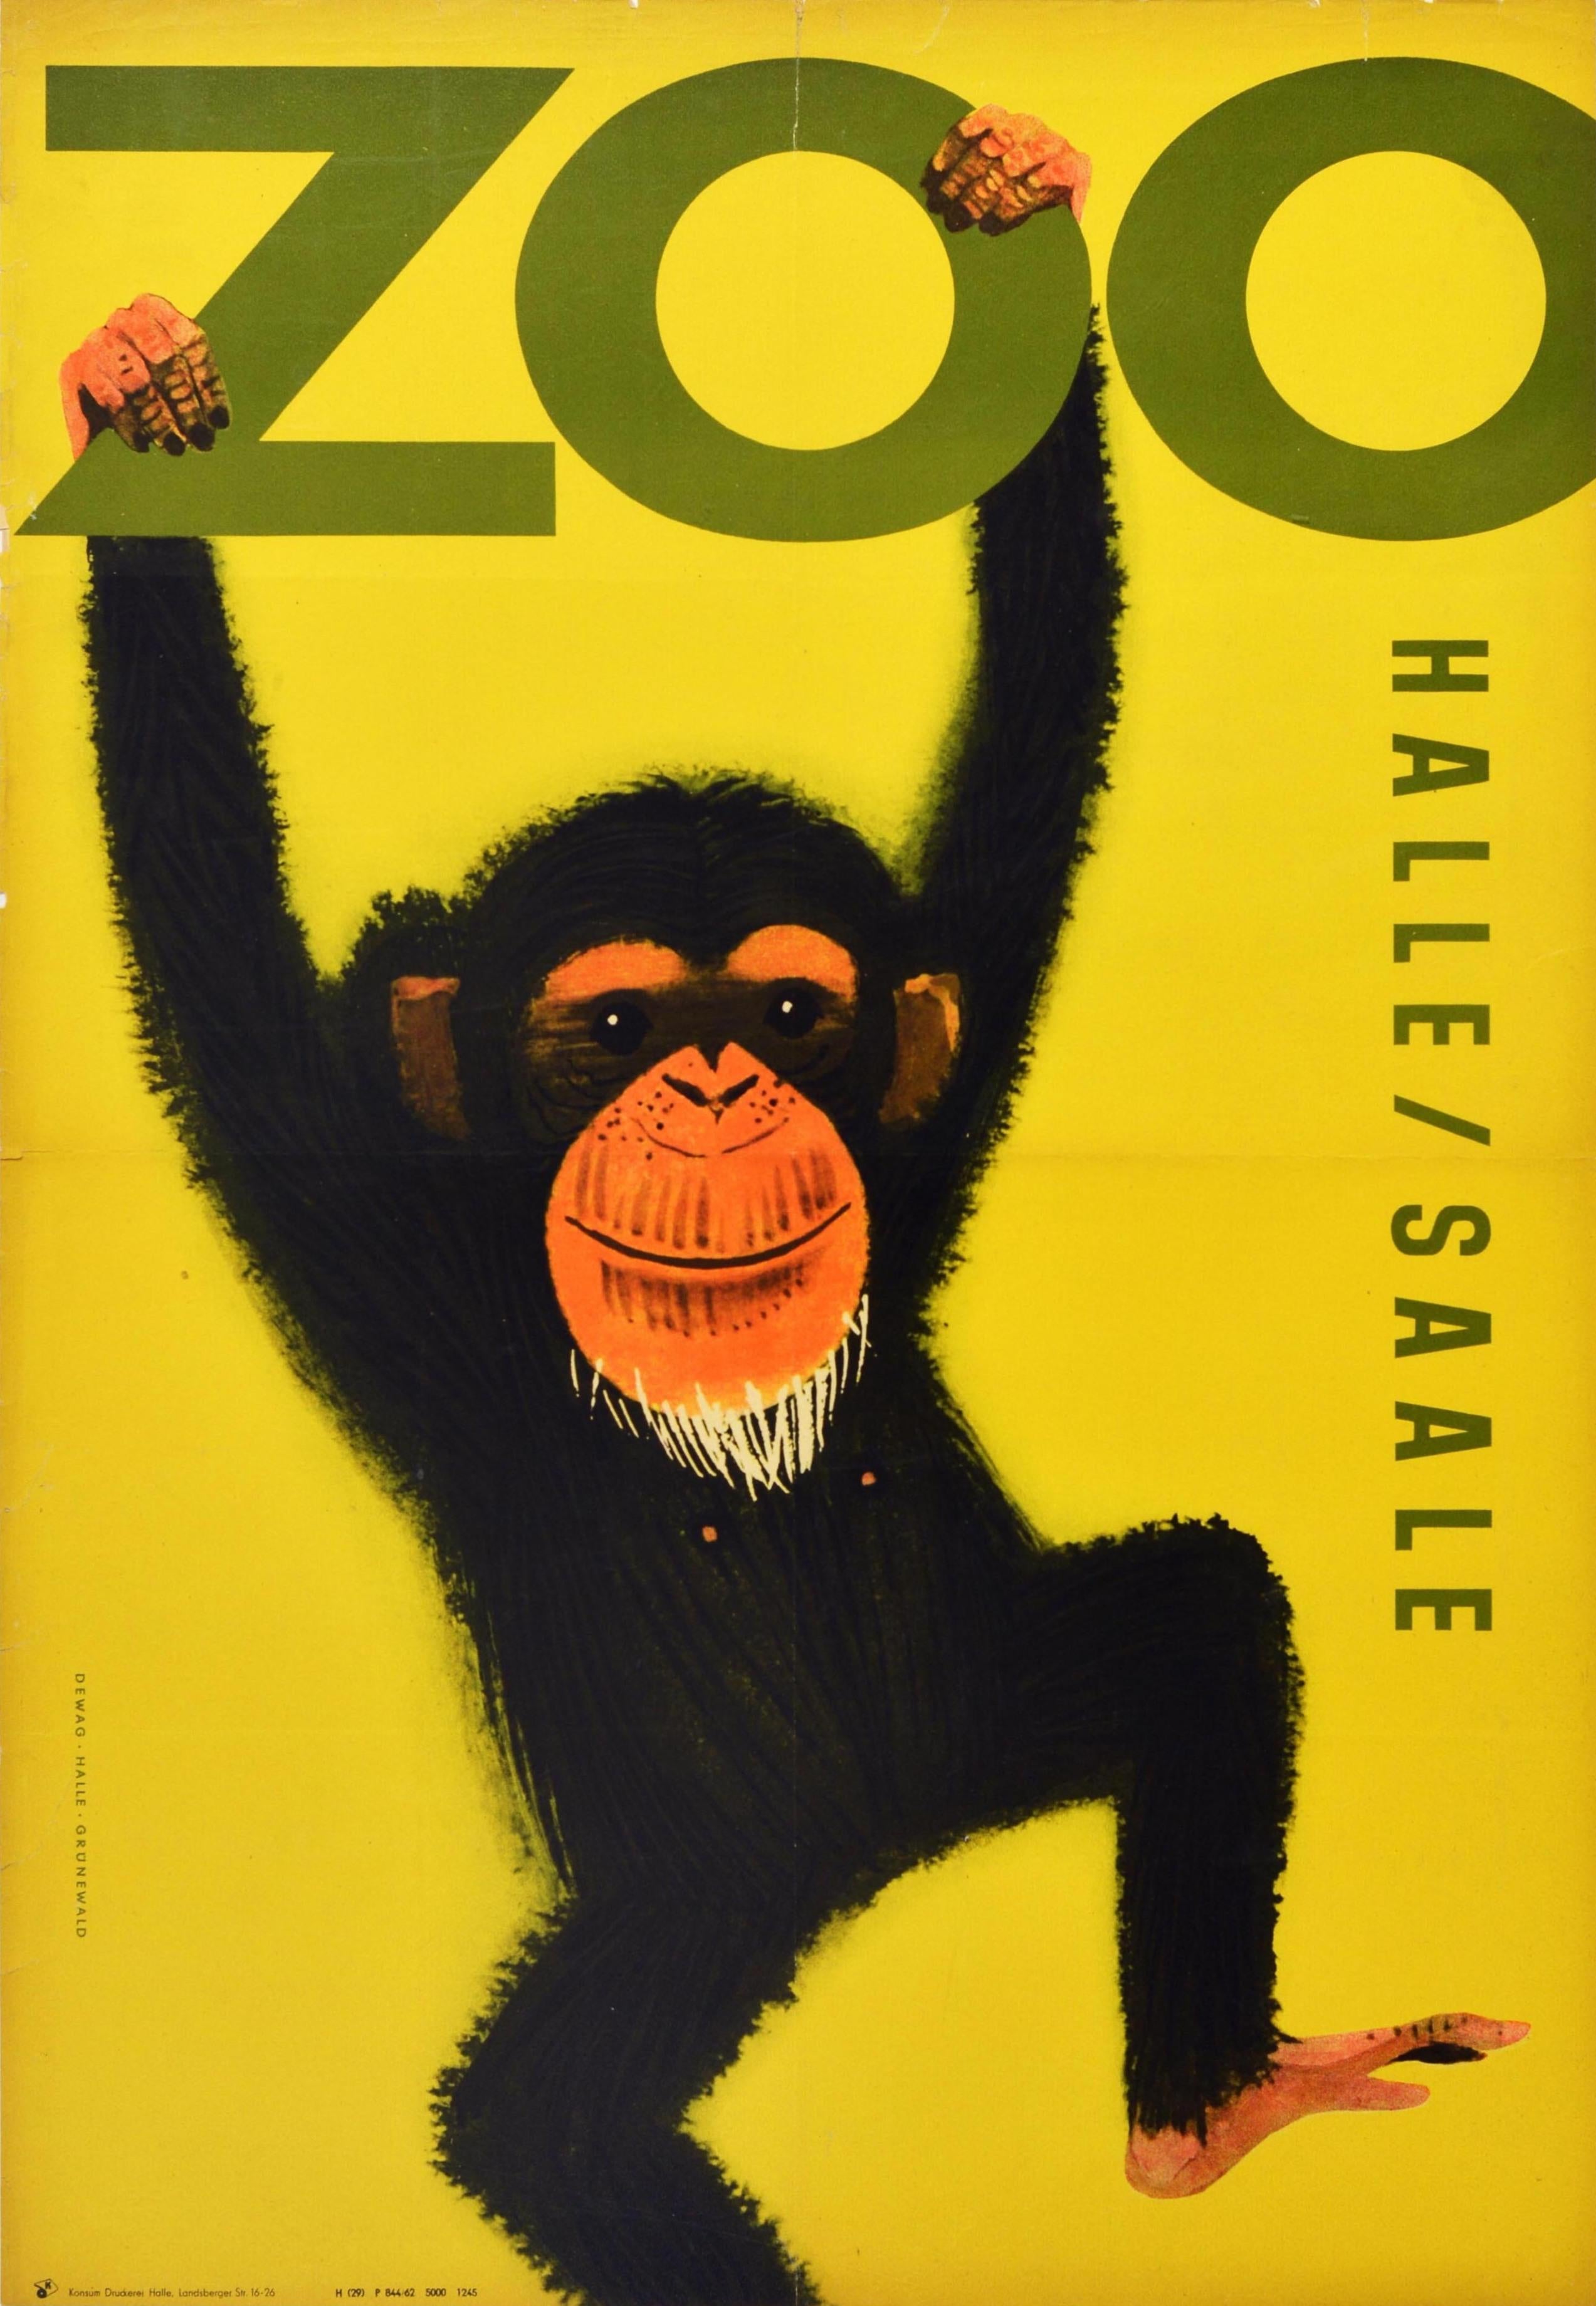 Original vintage travel poster for the Zoo Halle / Saale featuring a fun and colourful illustration of a chimpanzee hanging from the word Zoo set against a yellow background. Opened in 1901, the Halle Zoo is located in the mountain area of Saxony